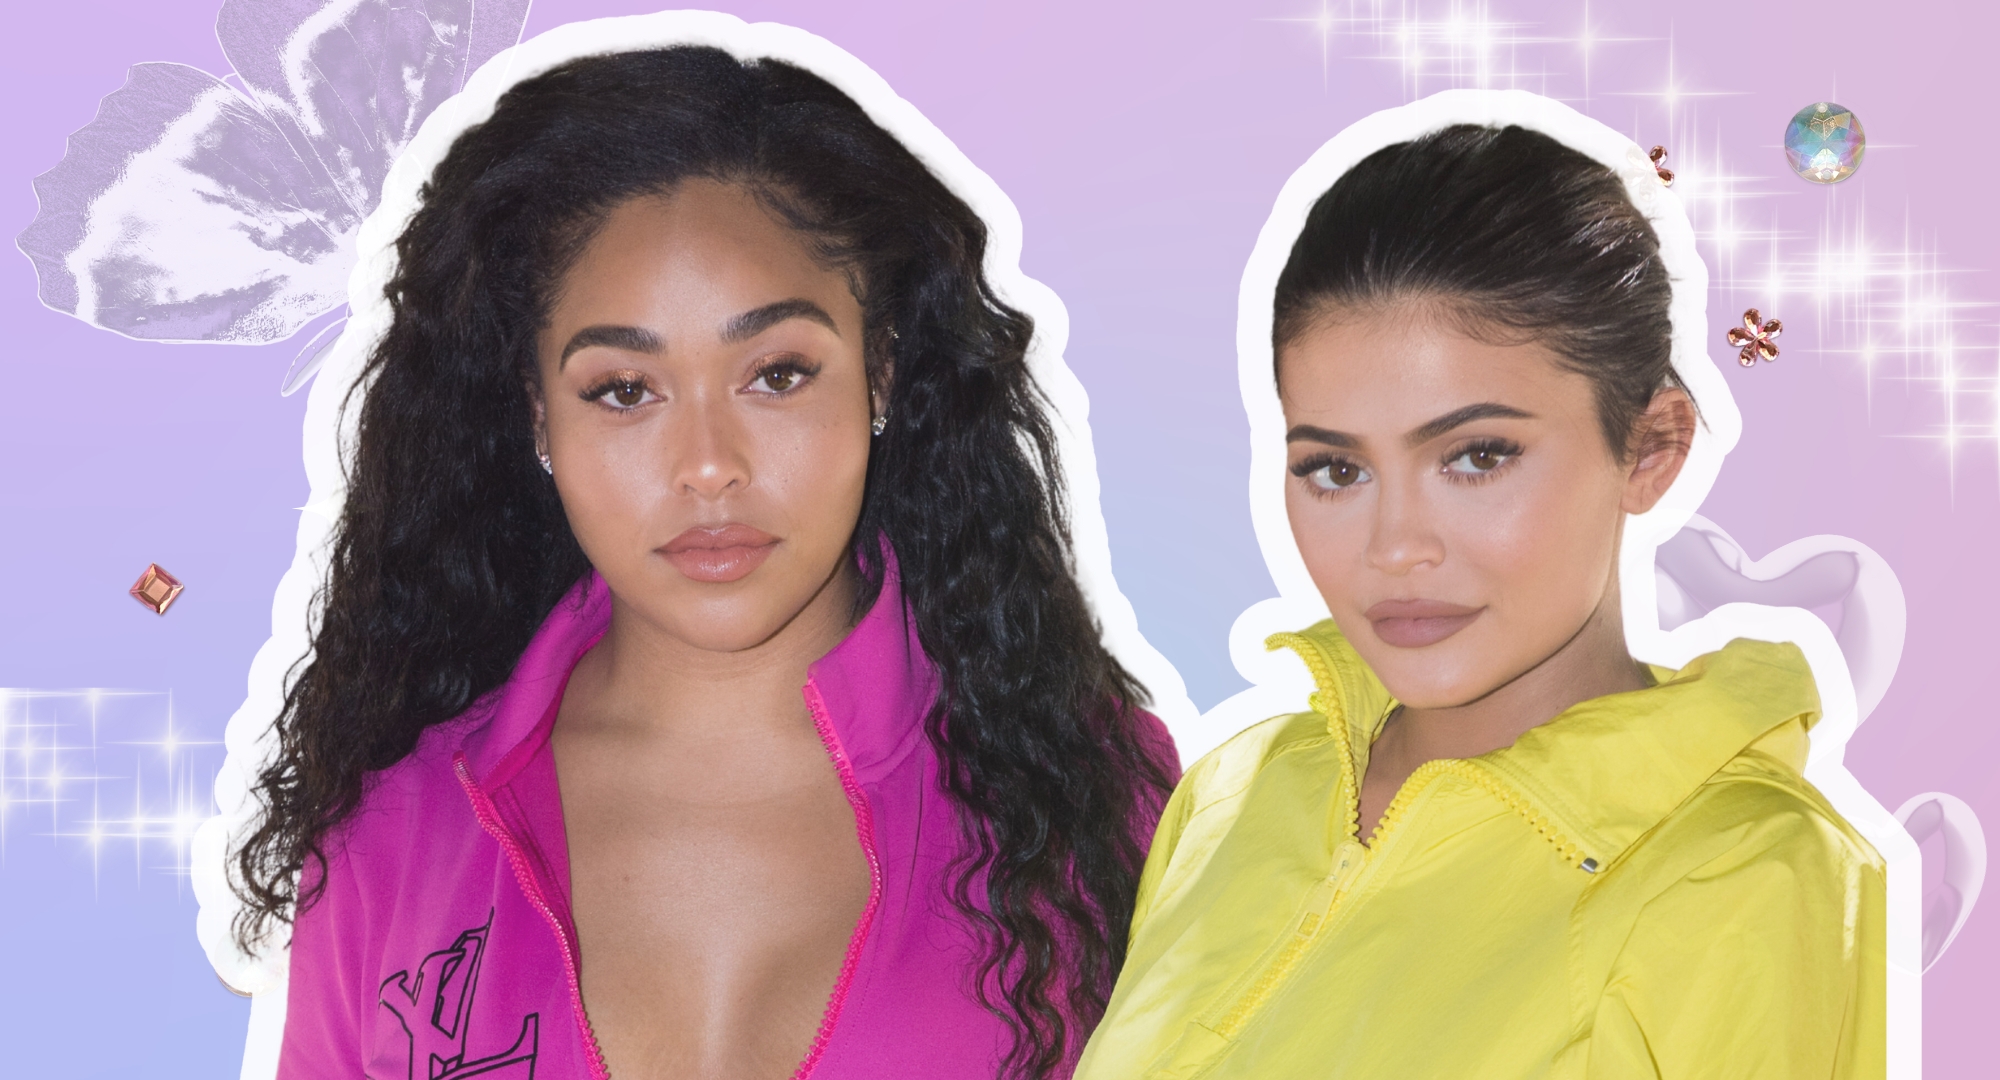 Are Kylie Jenner and Jordyn Woods Still Friends?